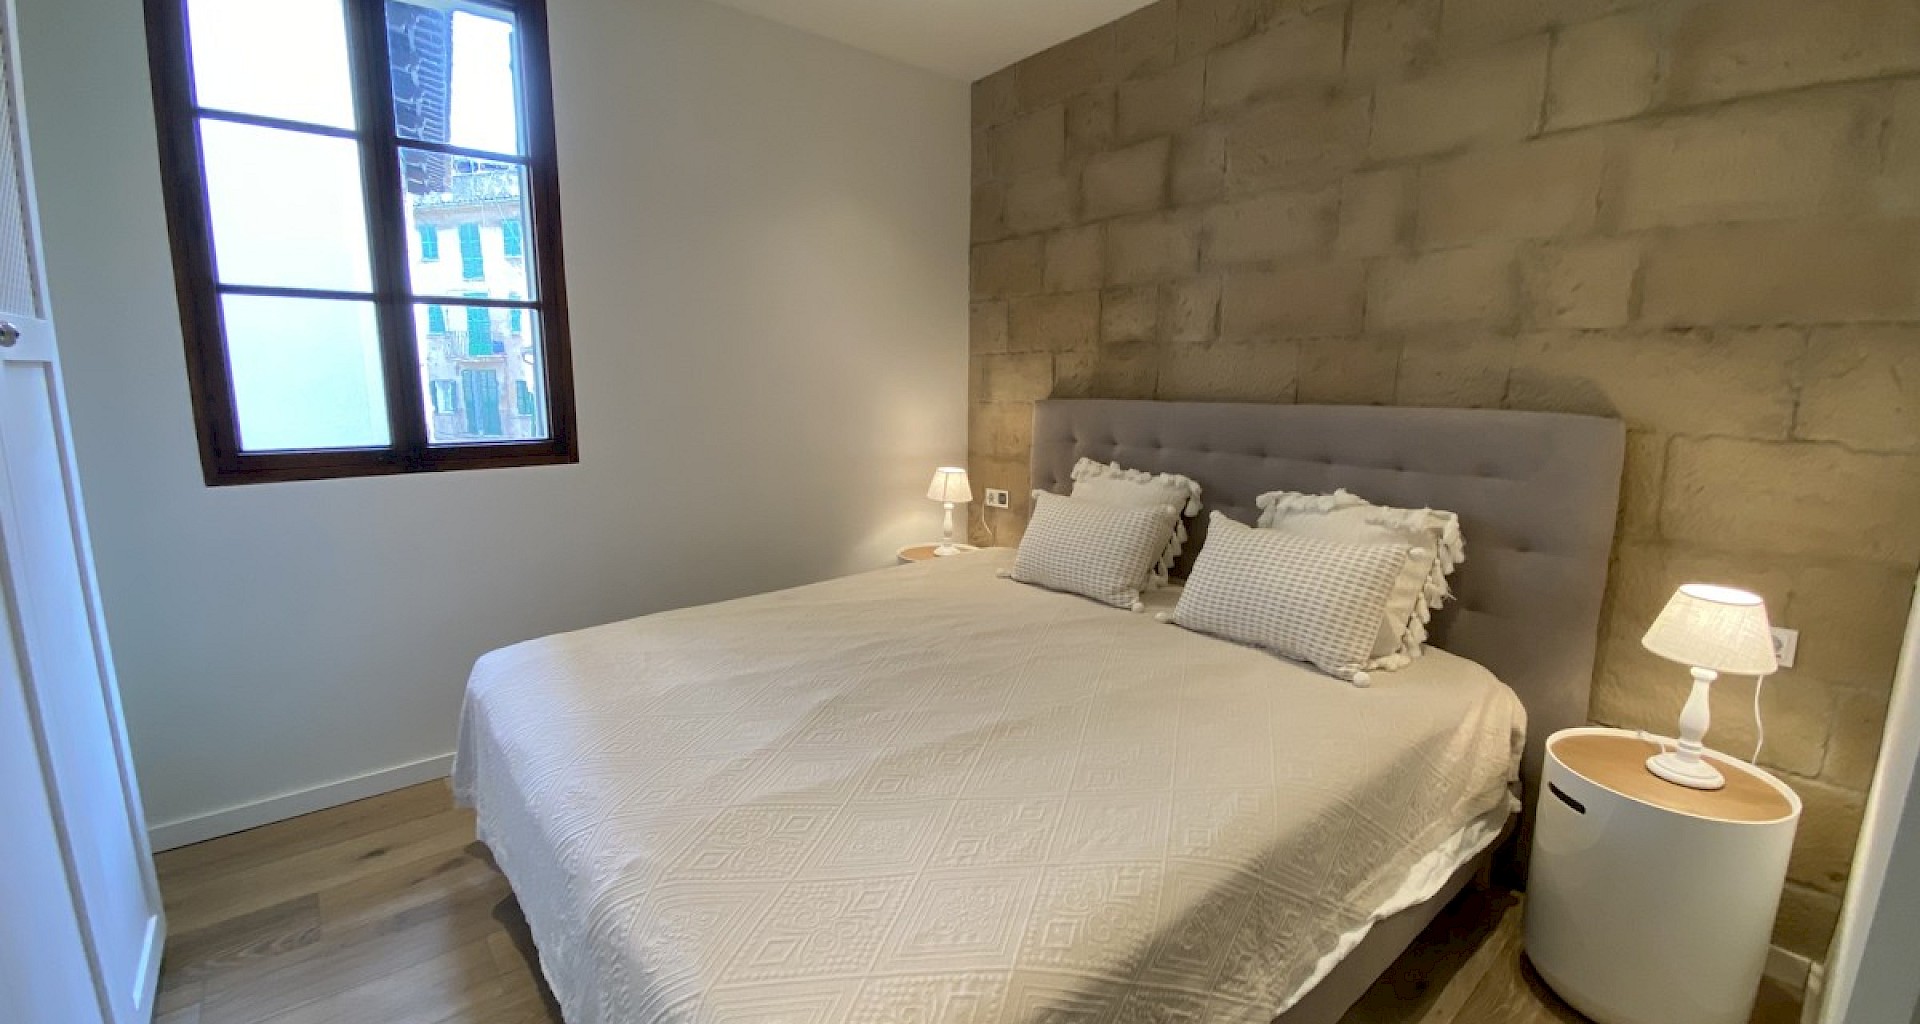 KROHN & LUEDEMANN Modern renovated apartment in Palma old town for sale Wohnung in Palma Altstadt 11